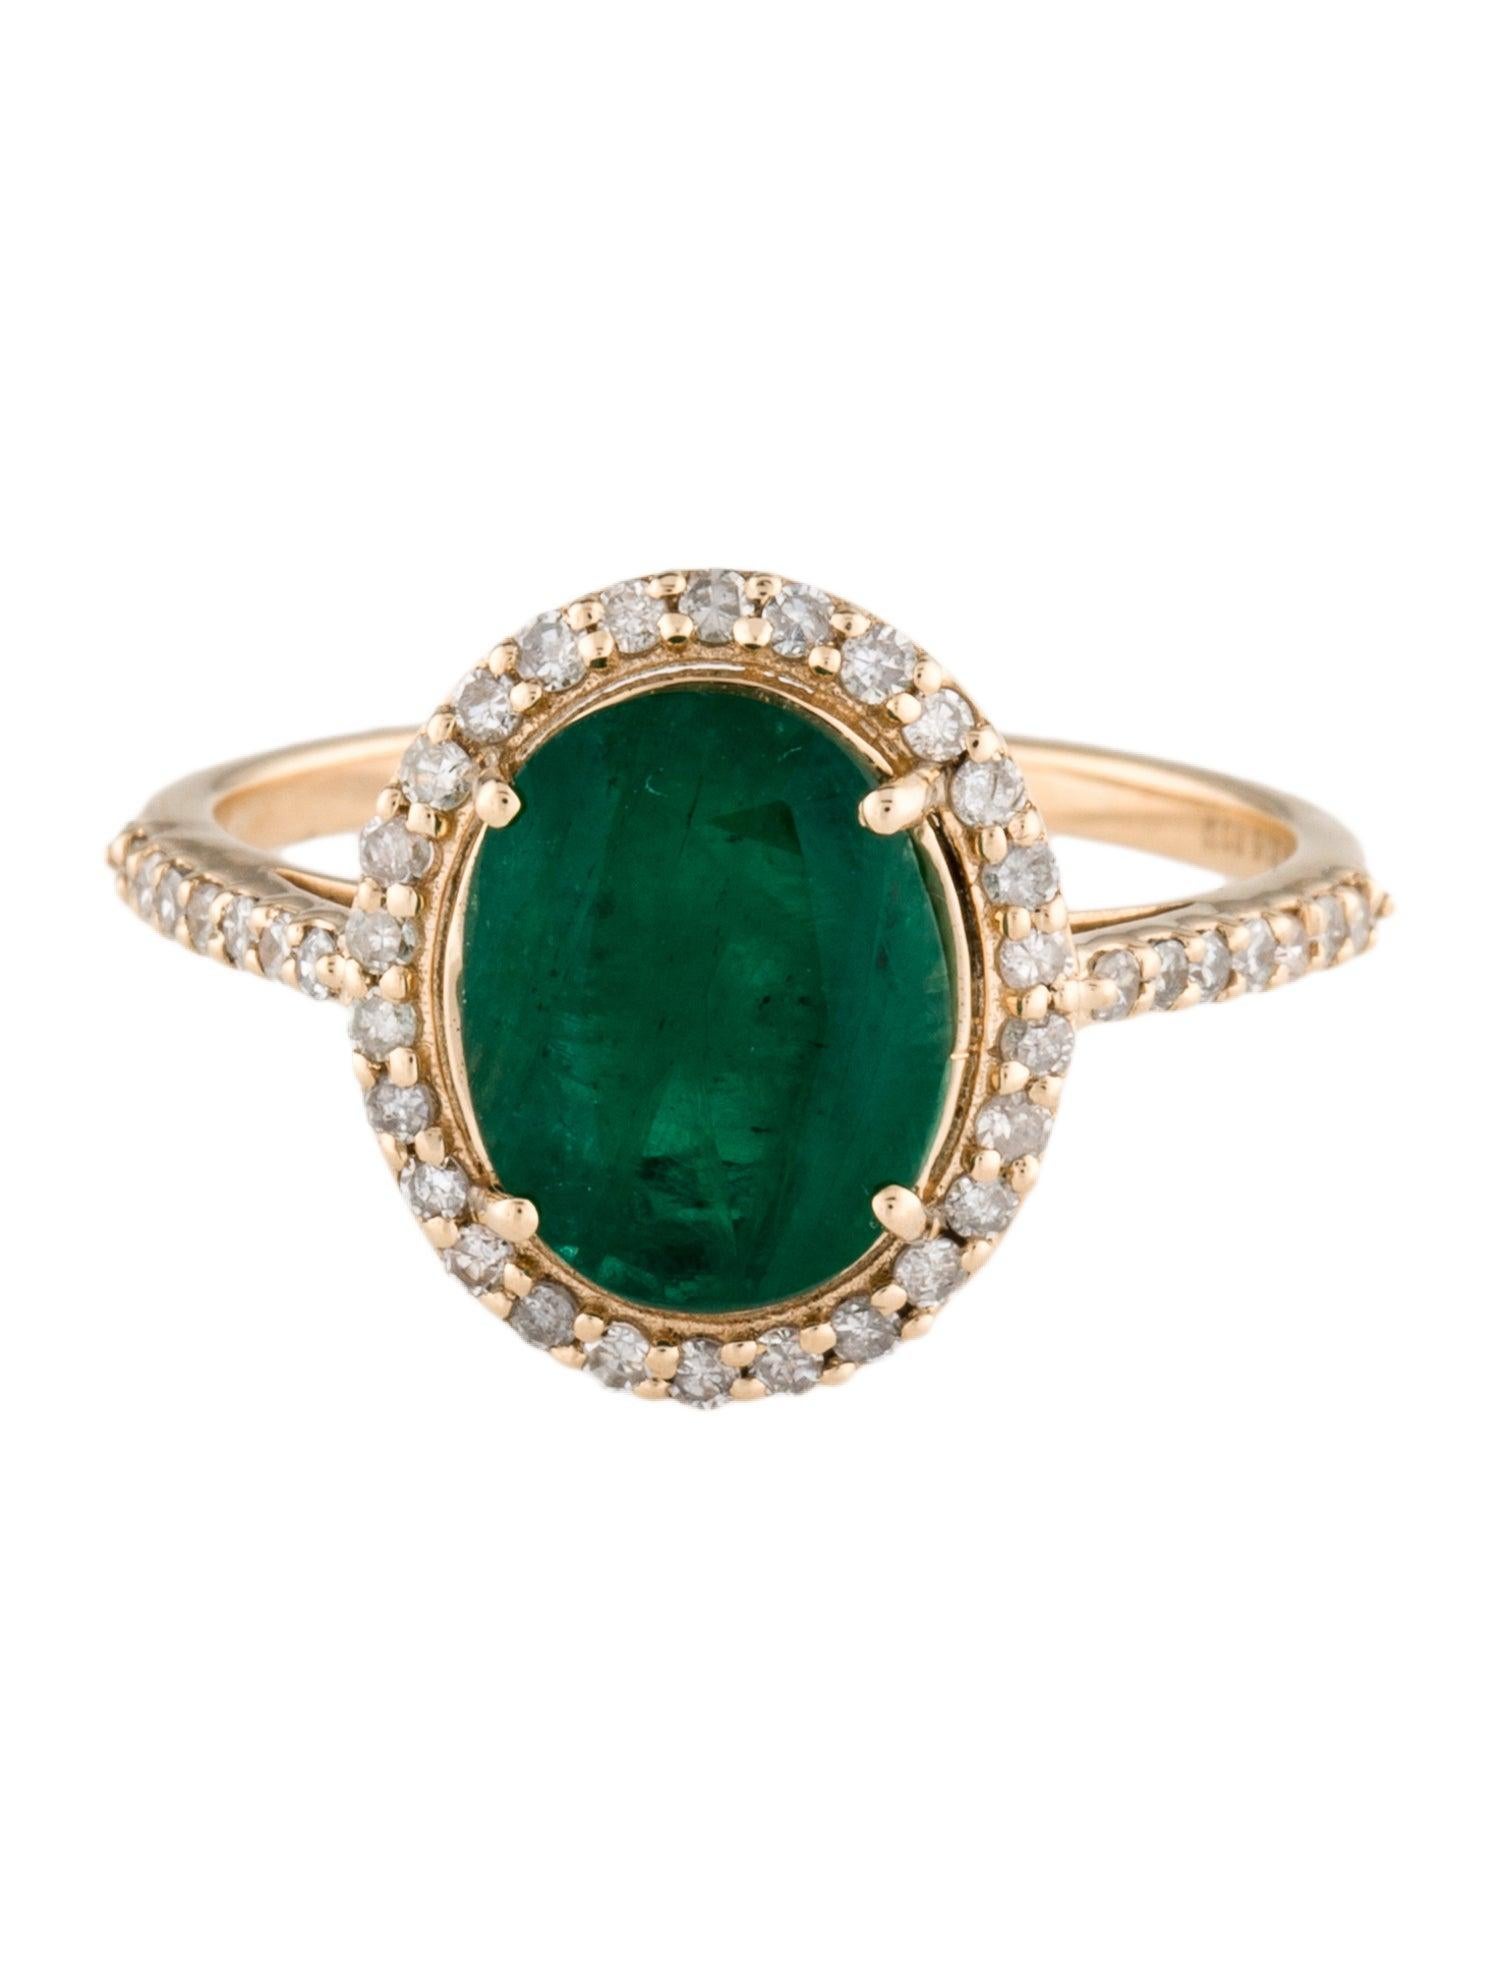 Oval Cut 14K Yellow Gold 1.91ct Oval Brilliant Emerald & Diamond Cocktail Ring, Size 7 For Sale